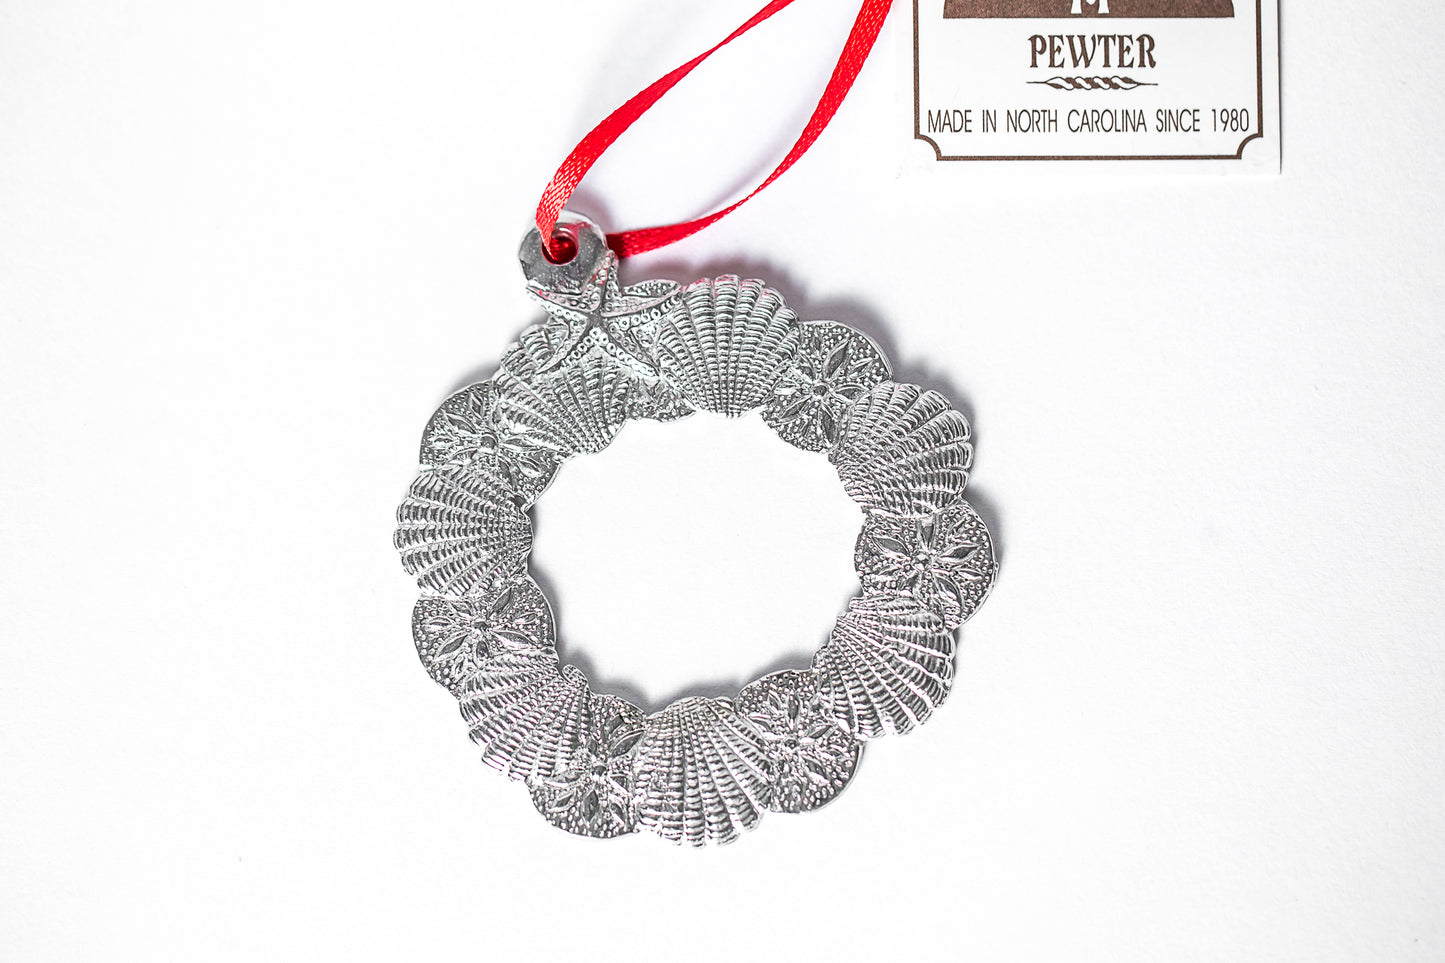 USA Handcrafted Seashell Wreath Beachy Shell Holiday Ornament Pewter Beach Lover Gift